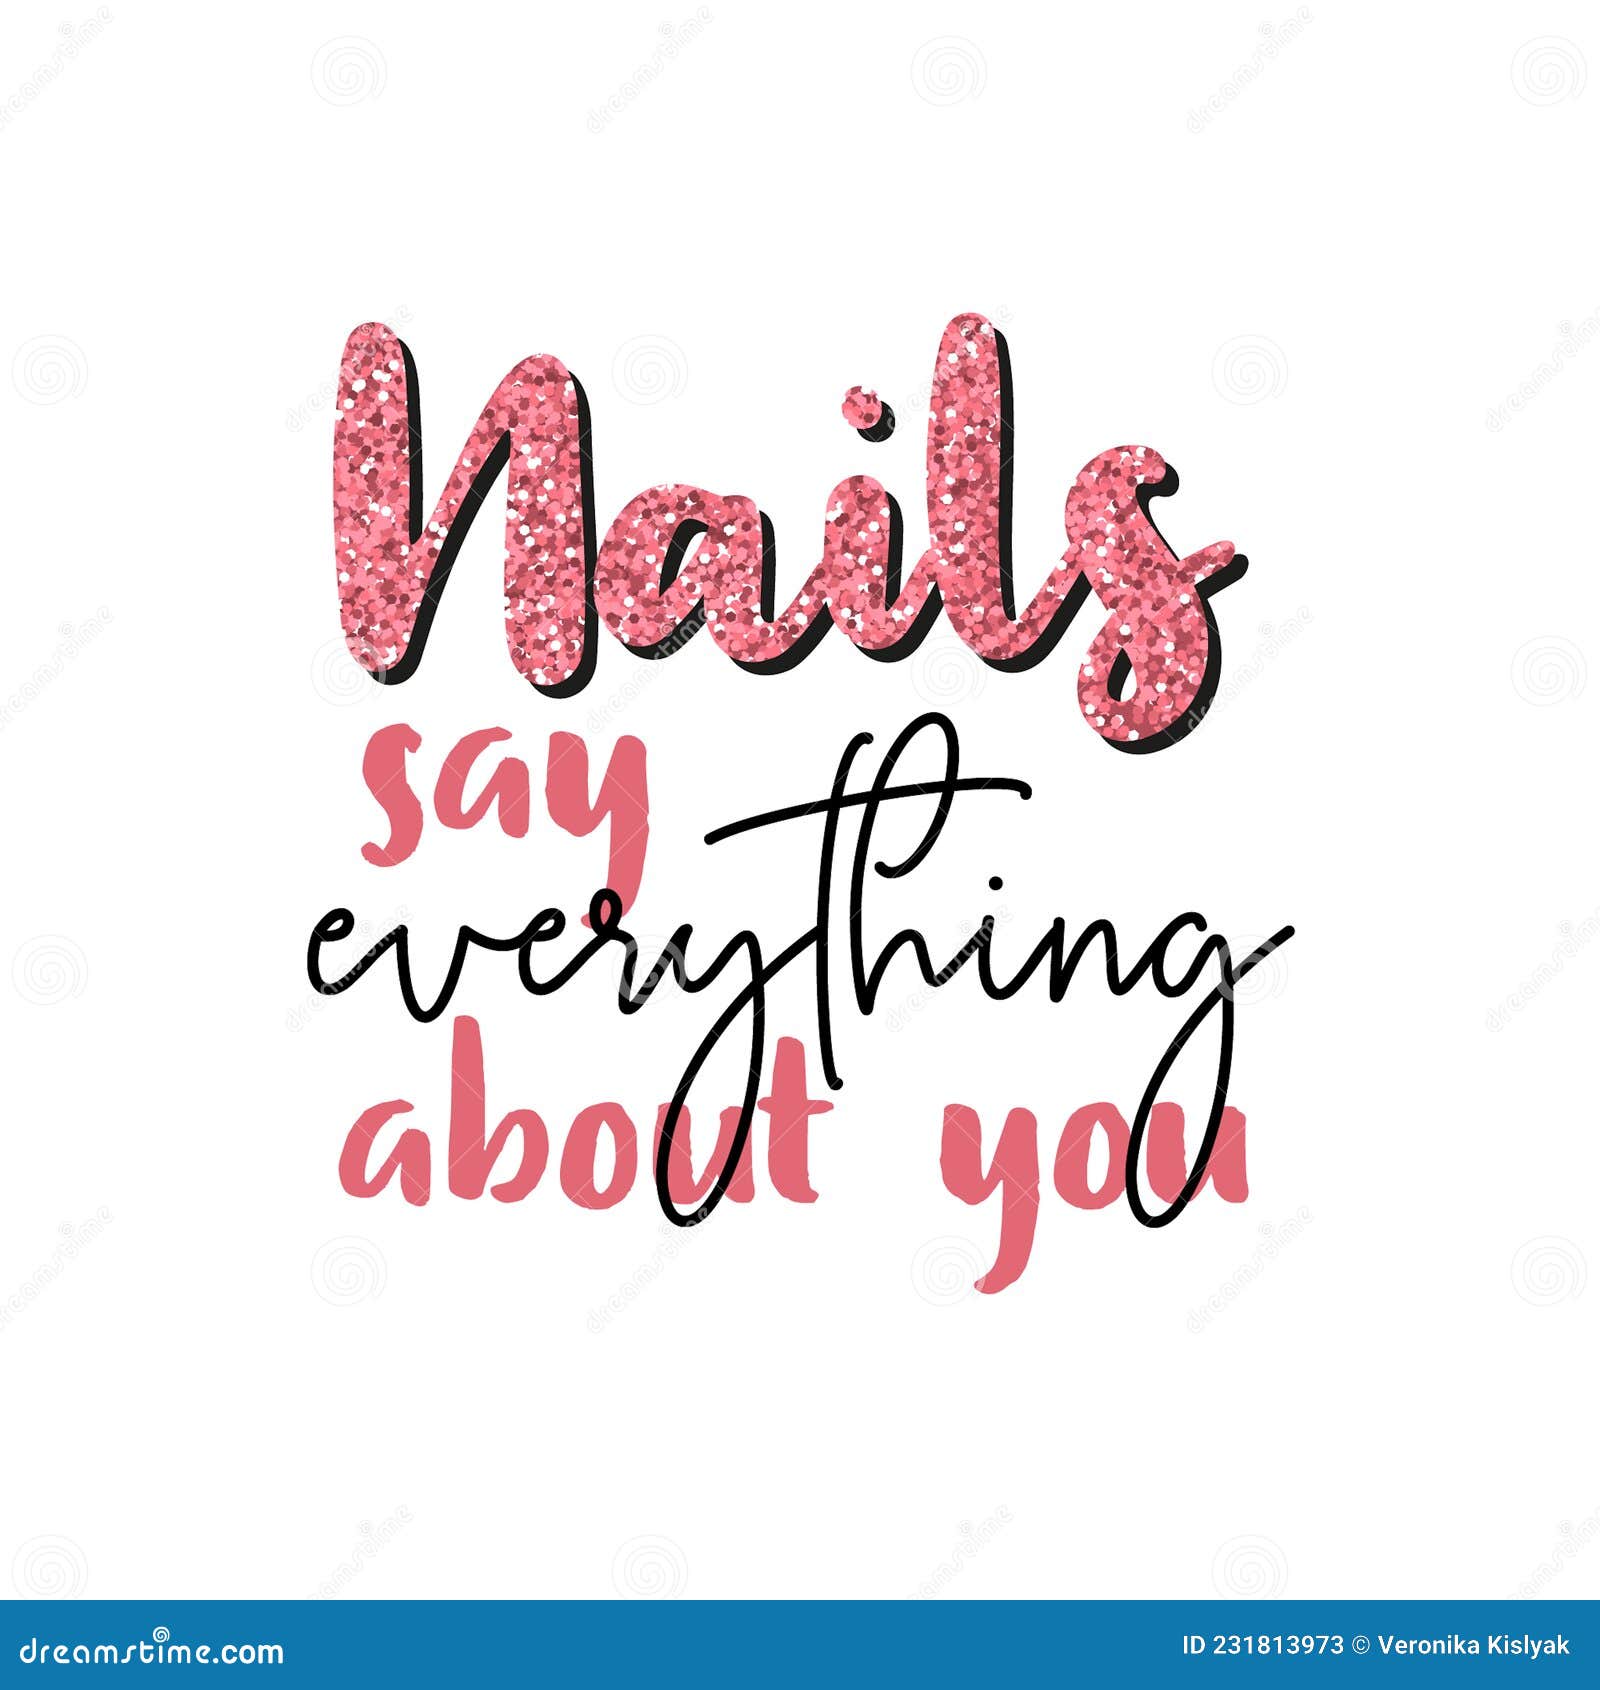 1,880 Nail Quotes Images, Stock Photos, 3D objects, & Vectors | Shutterstock